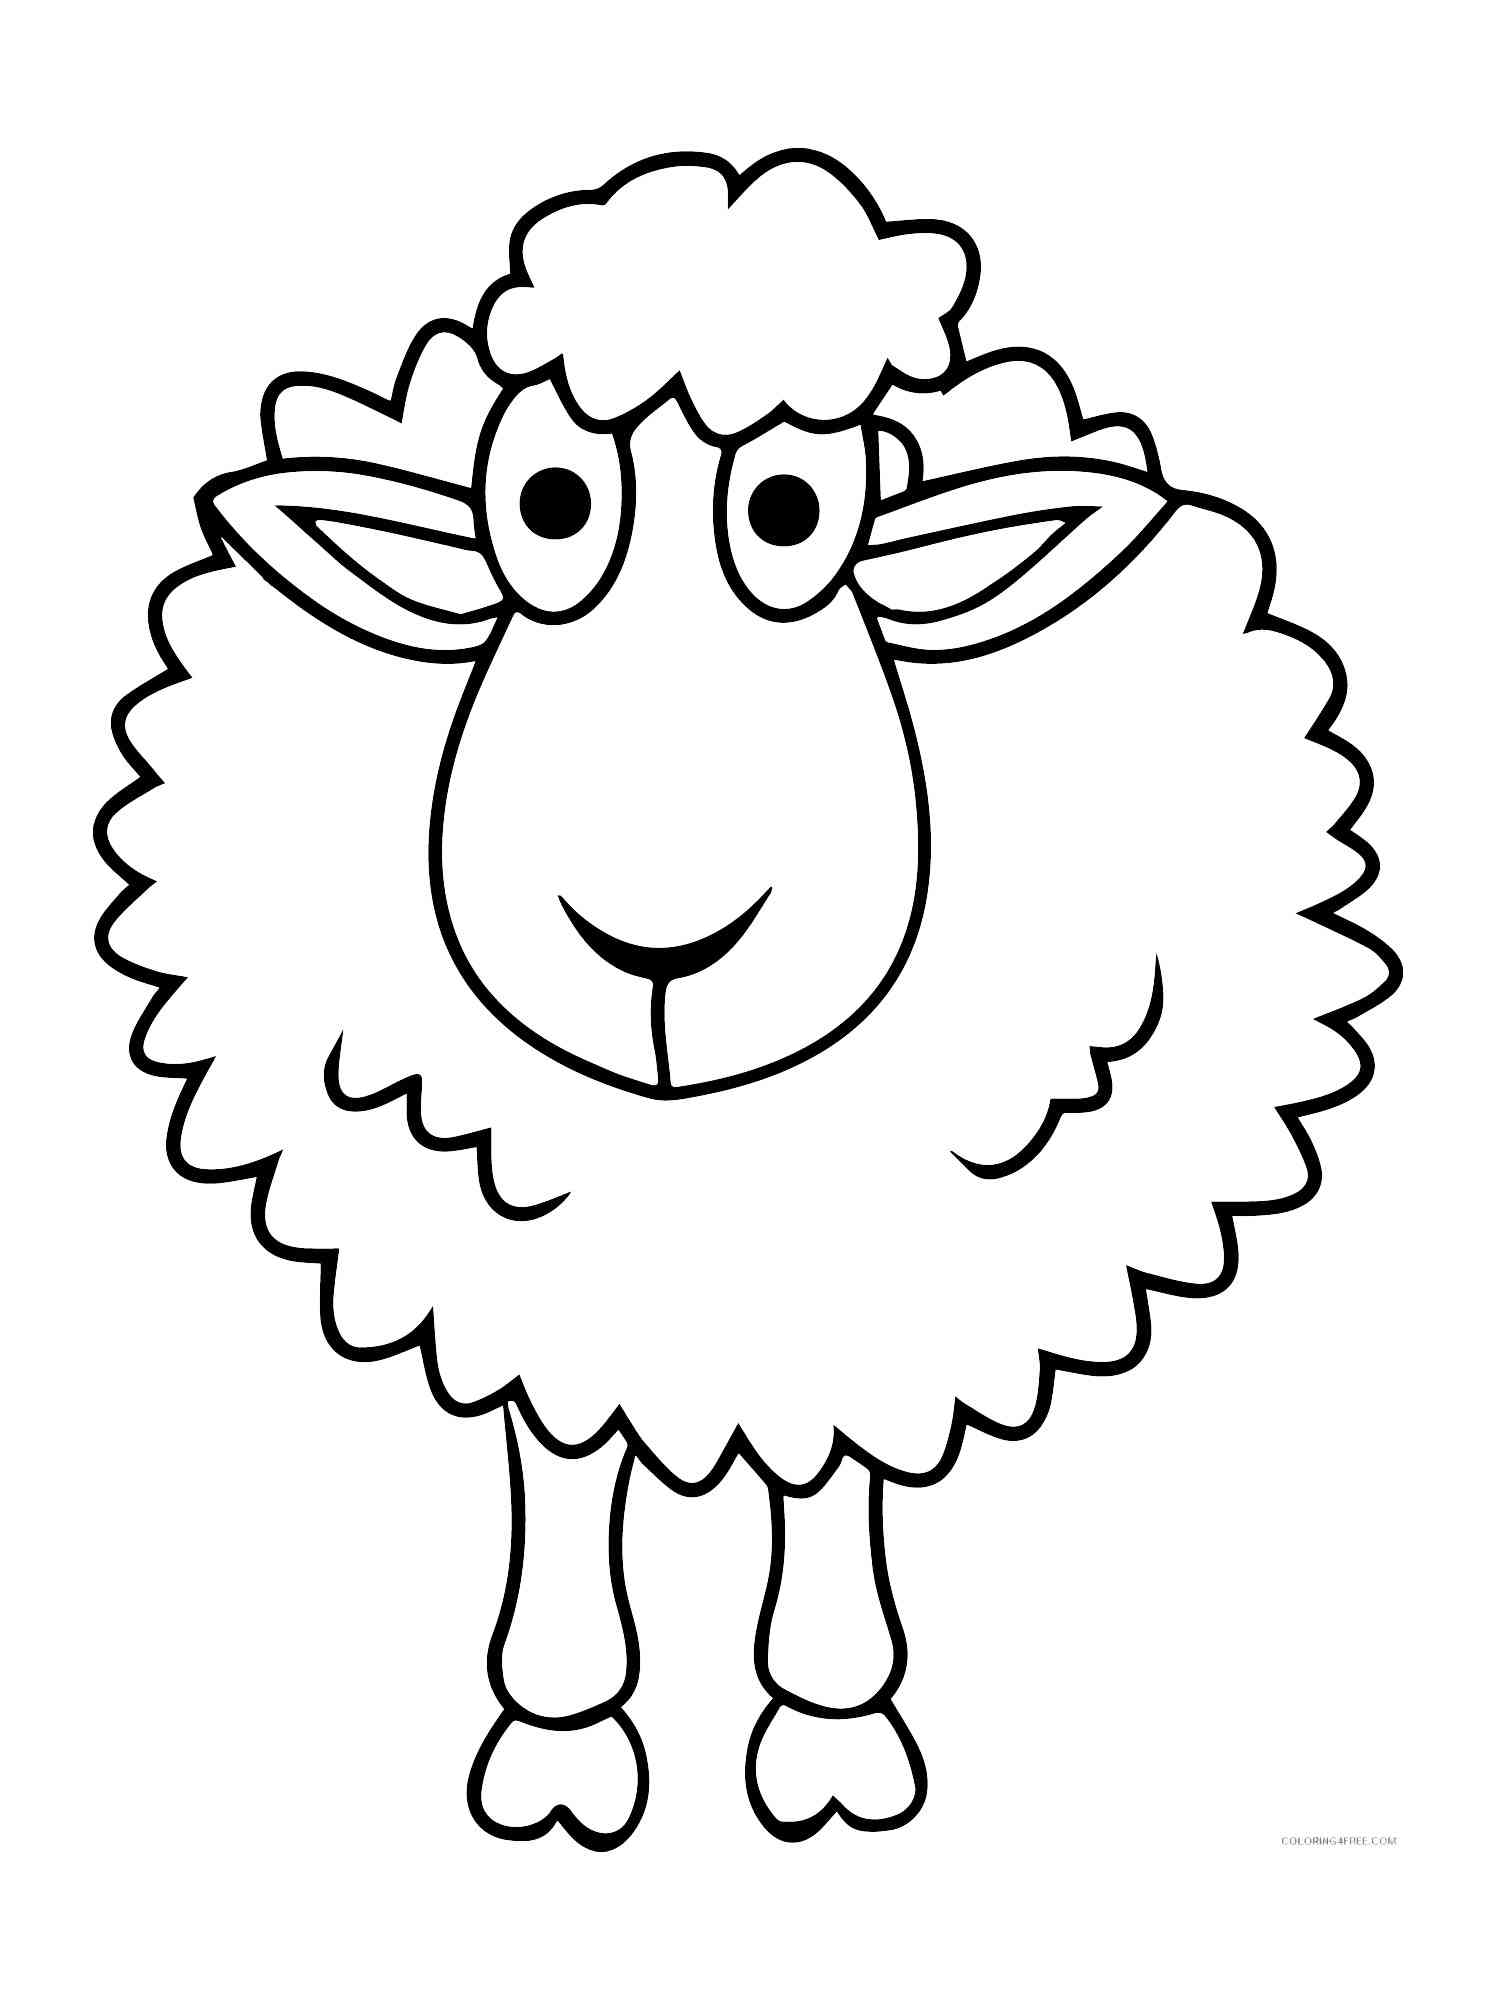 Funny Sheep coloring page